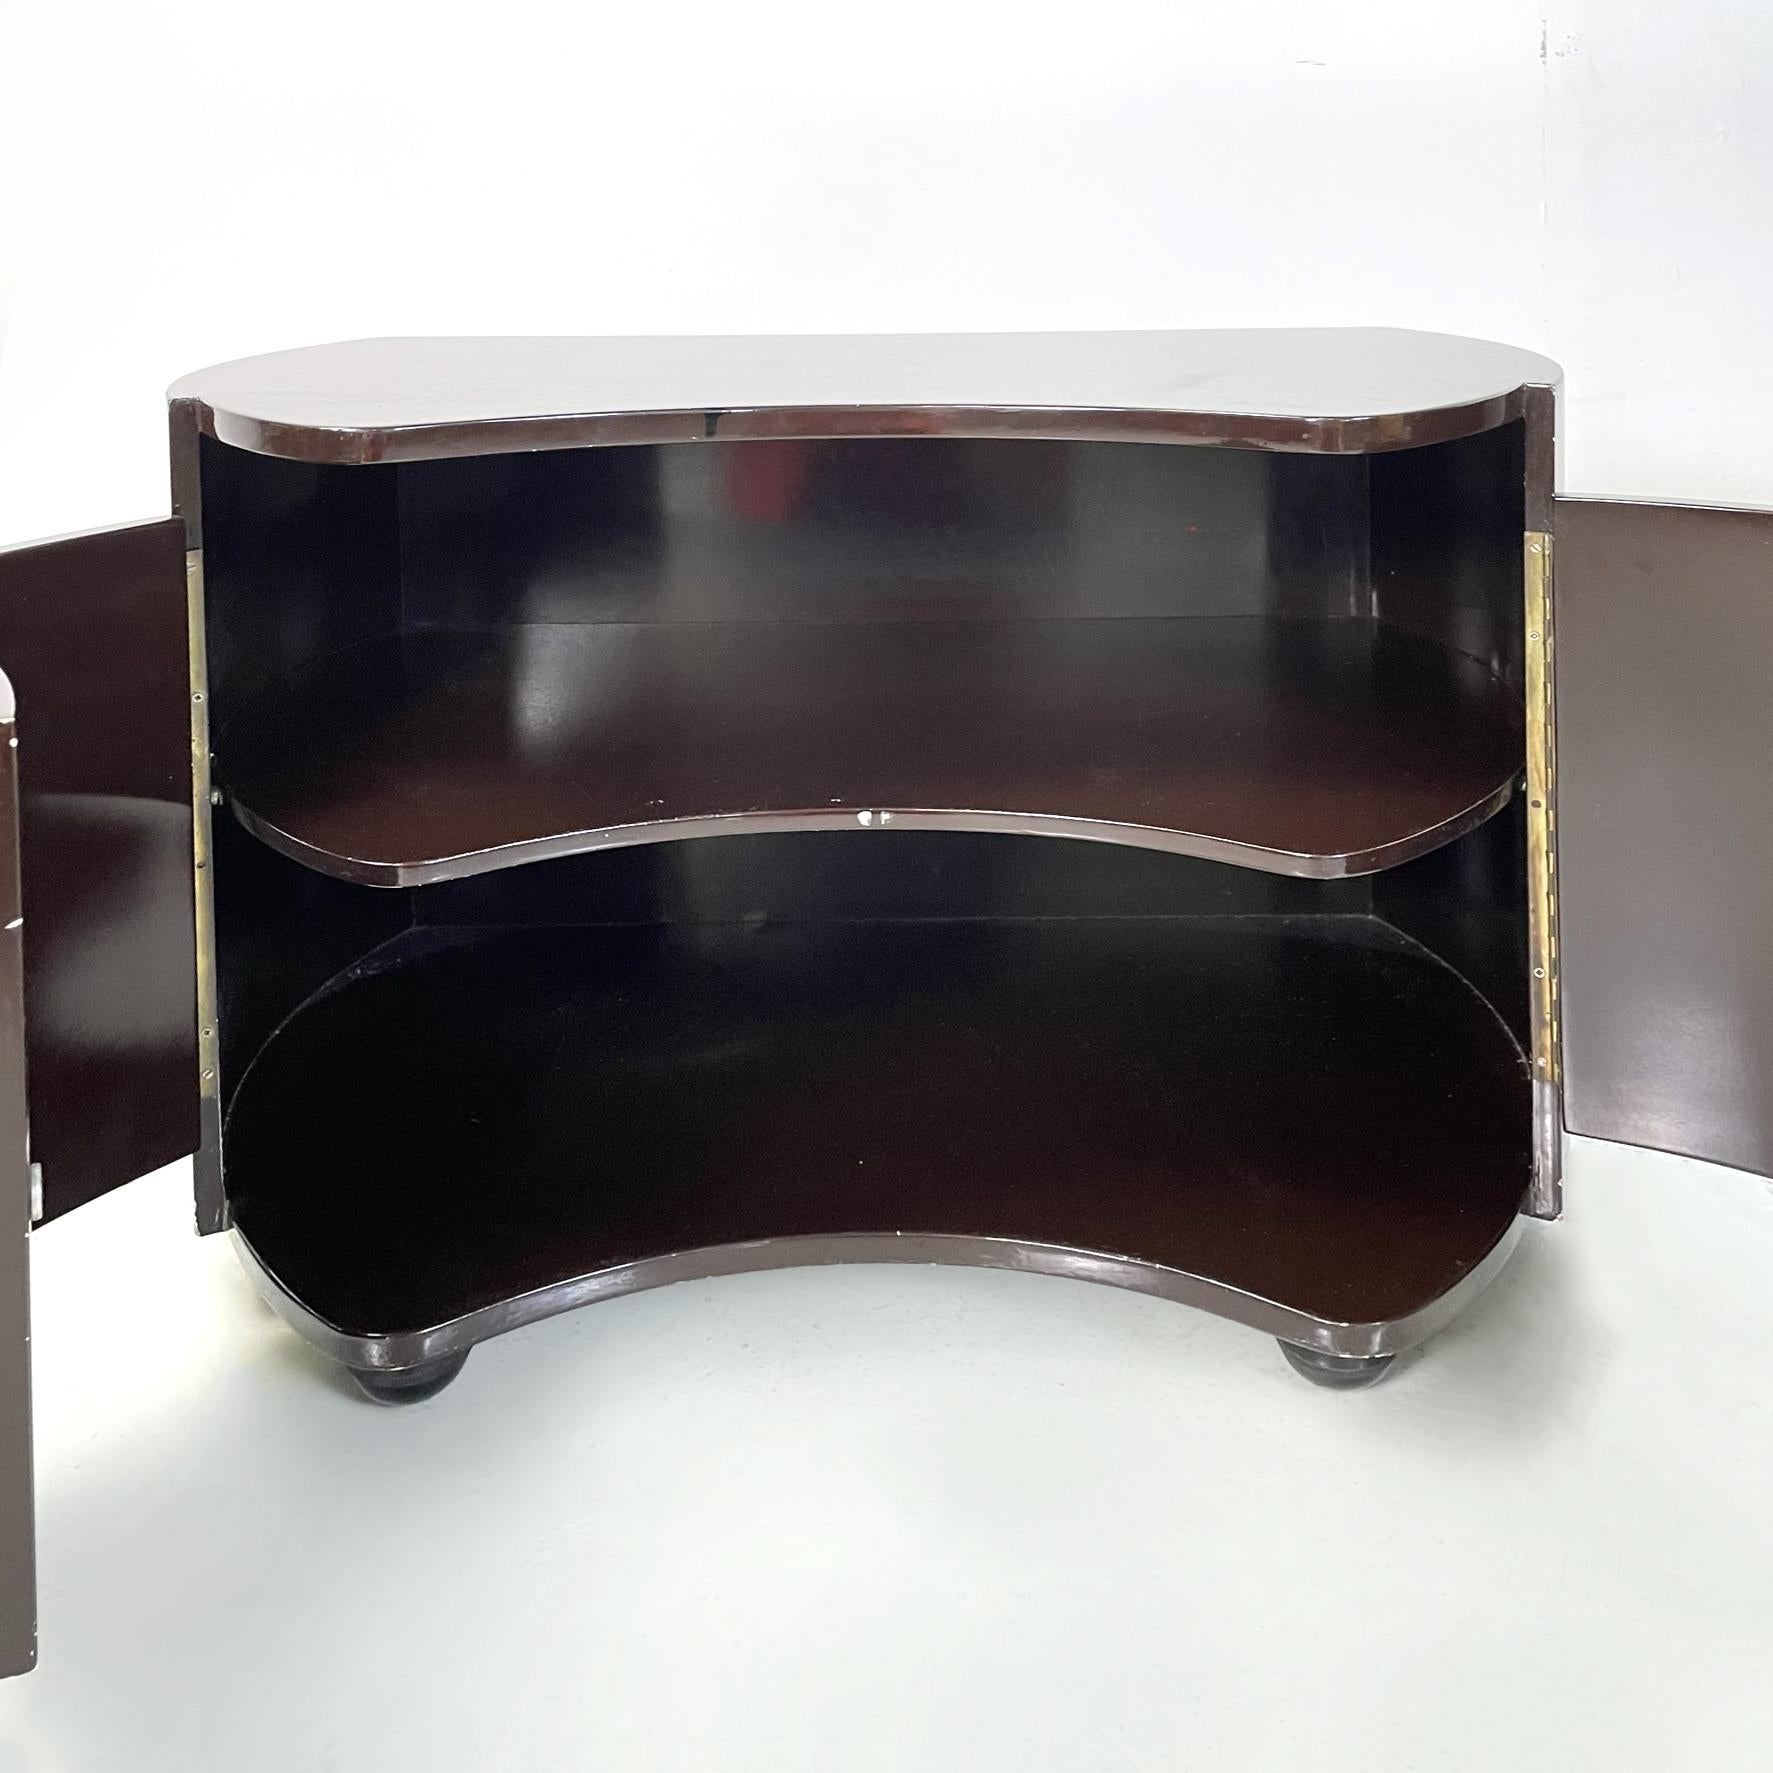 Wood Italian modern Dark brown lacquered wood bed side table Aiace by Benatti, 1970s For Sale